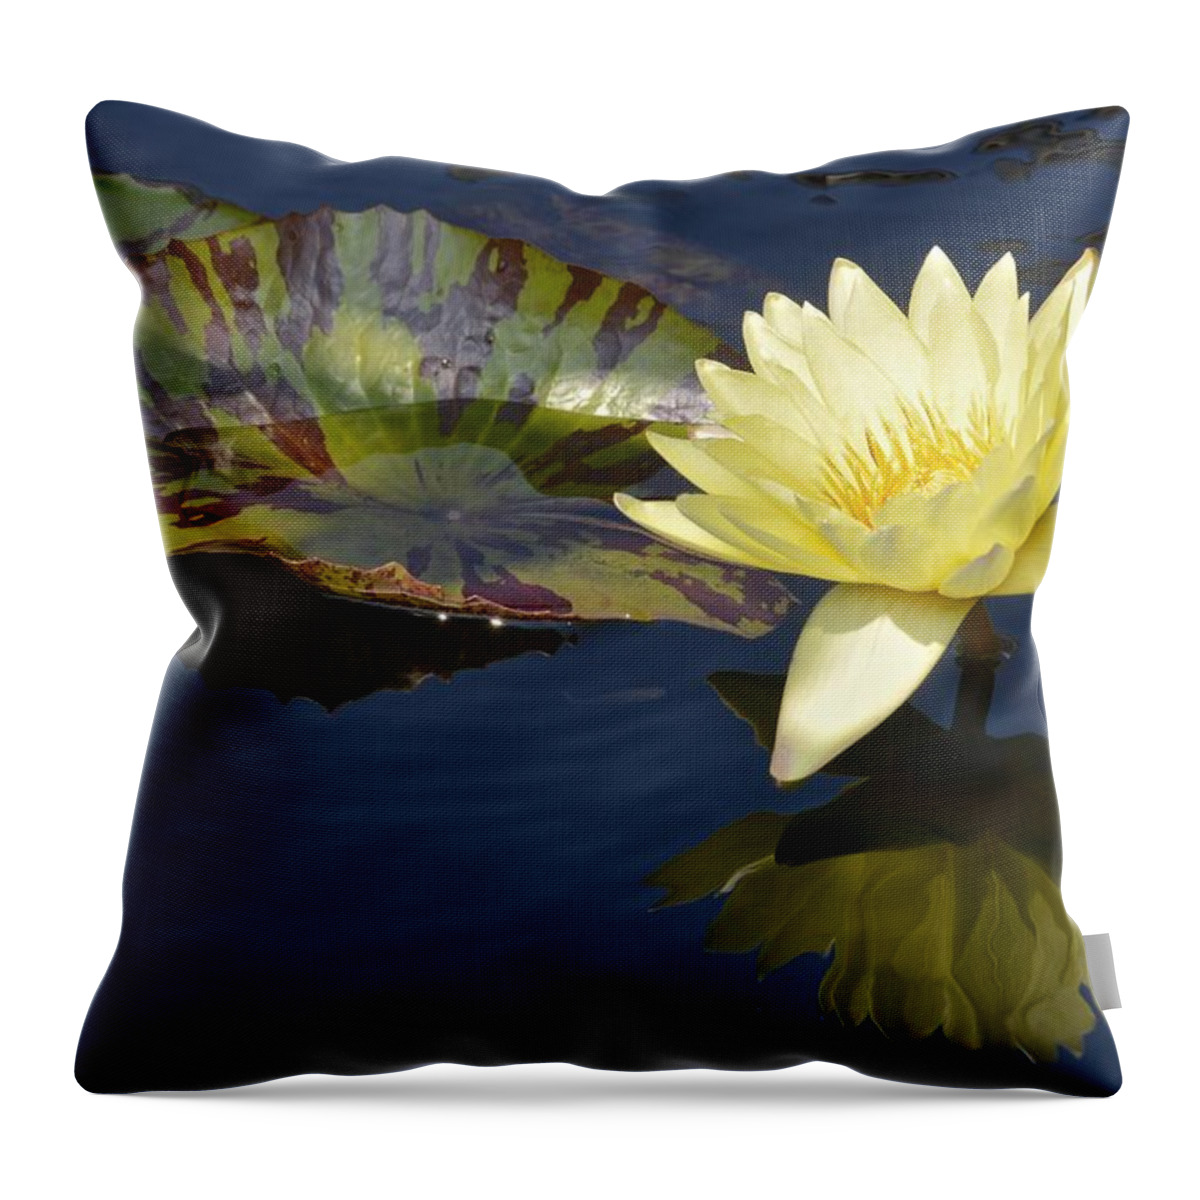 Longwood Gardens Throw Pillow featuring the photograph Yellow Waterlily by Tana Reiff